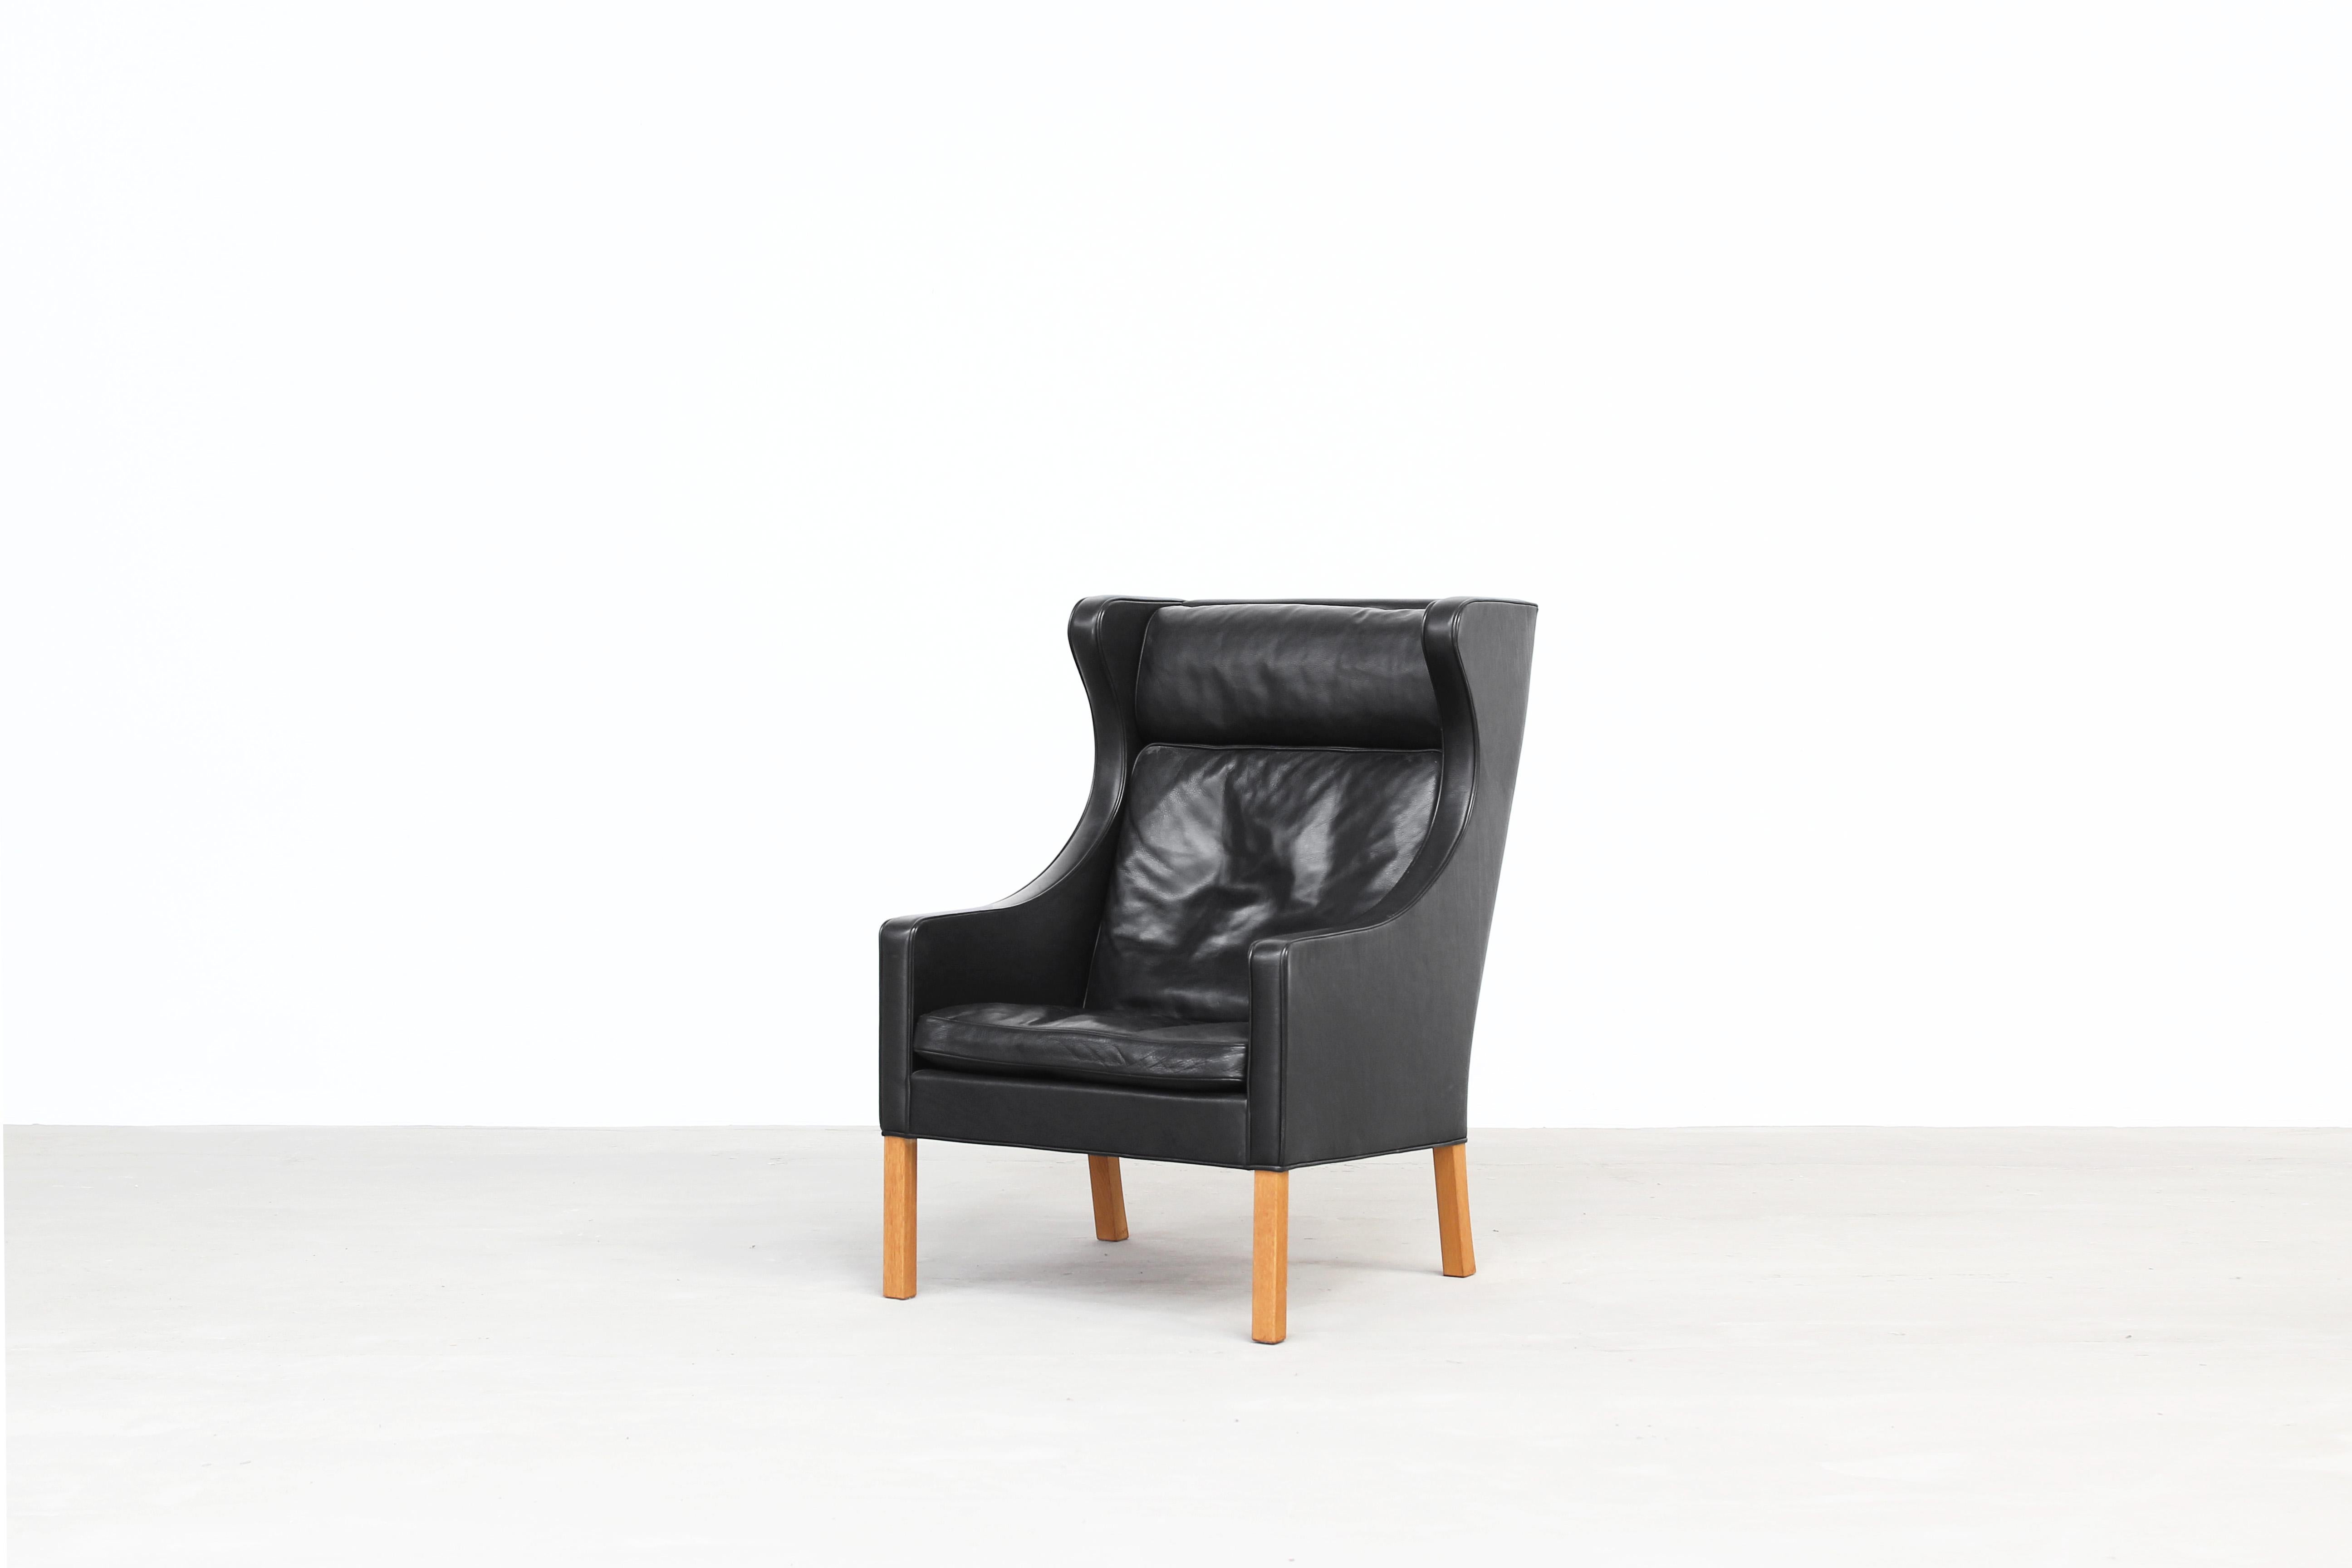 Beautiful lounge chair Mod. 2204 designed by Børge Mogensen and produced by Fredericia Stolefabrik in Denmark.
The lounge chair come in a great black leather with oak legs and is in a beautiful condition with just little traces of usage. Labeled